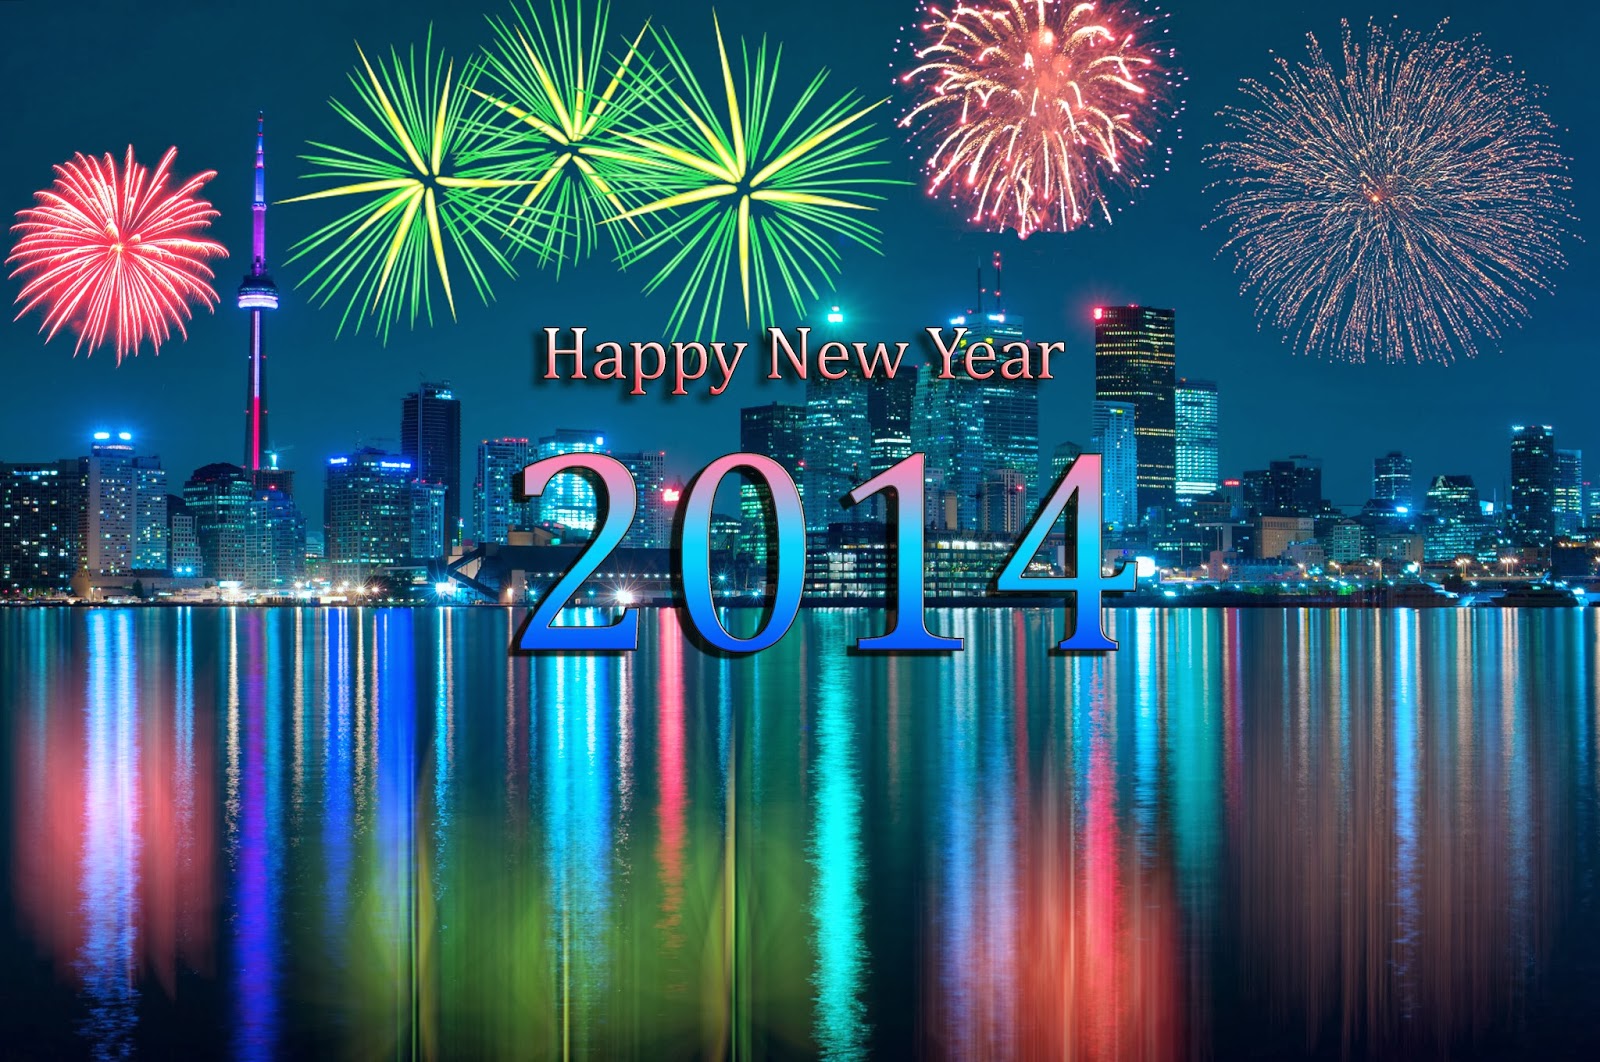 Best New Year 2014 HD Wallpapers for Desktop Screen   New